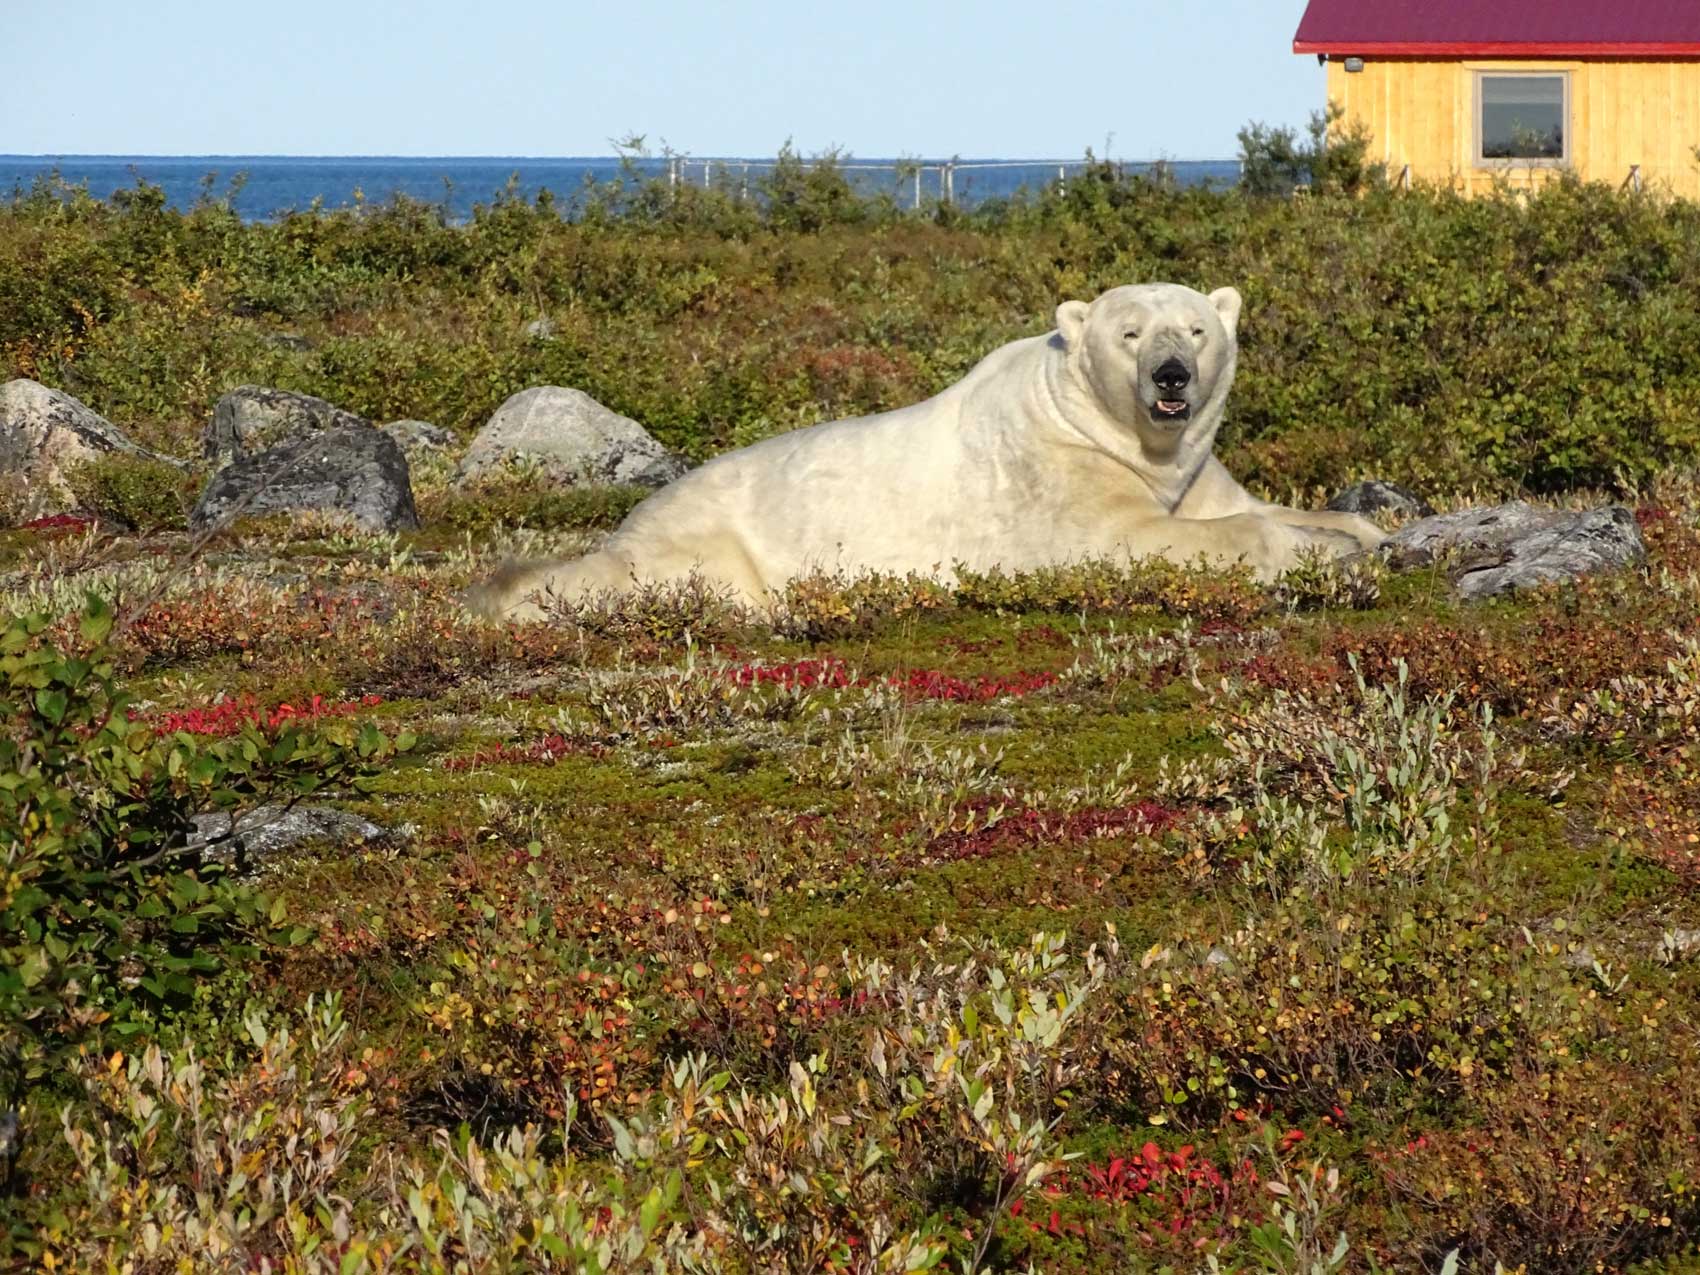 Polar bear in fall colours. Seal River Heritage Lodge. Photo courtesy of guests Sam and Frosty Frostman.